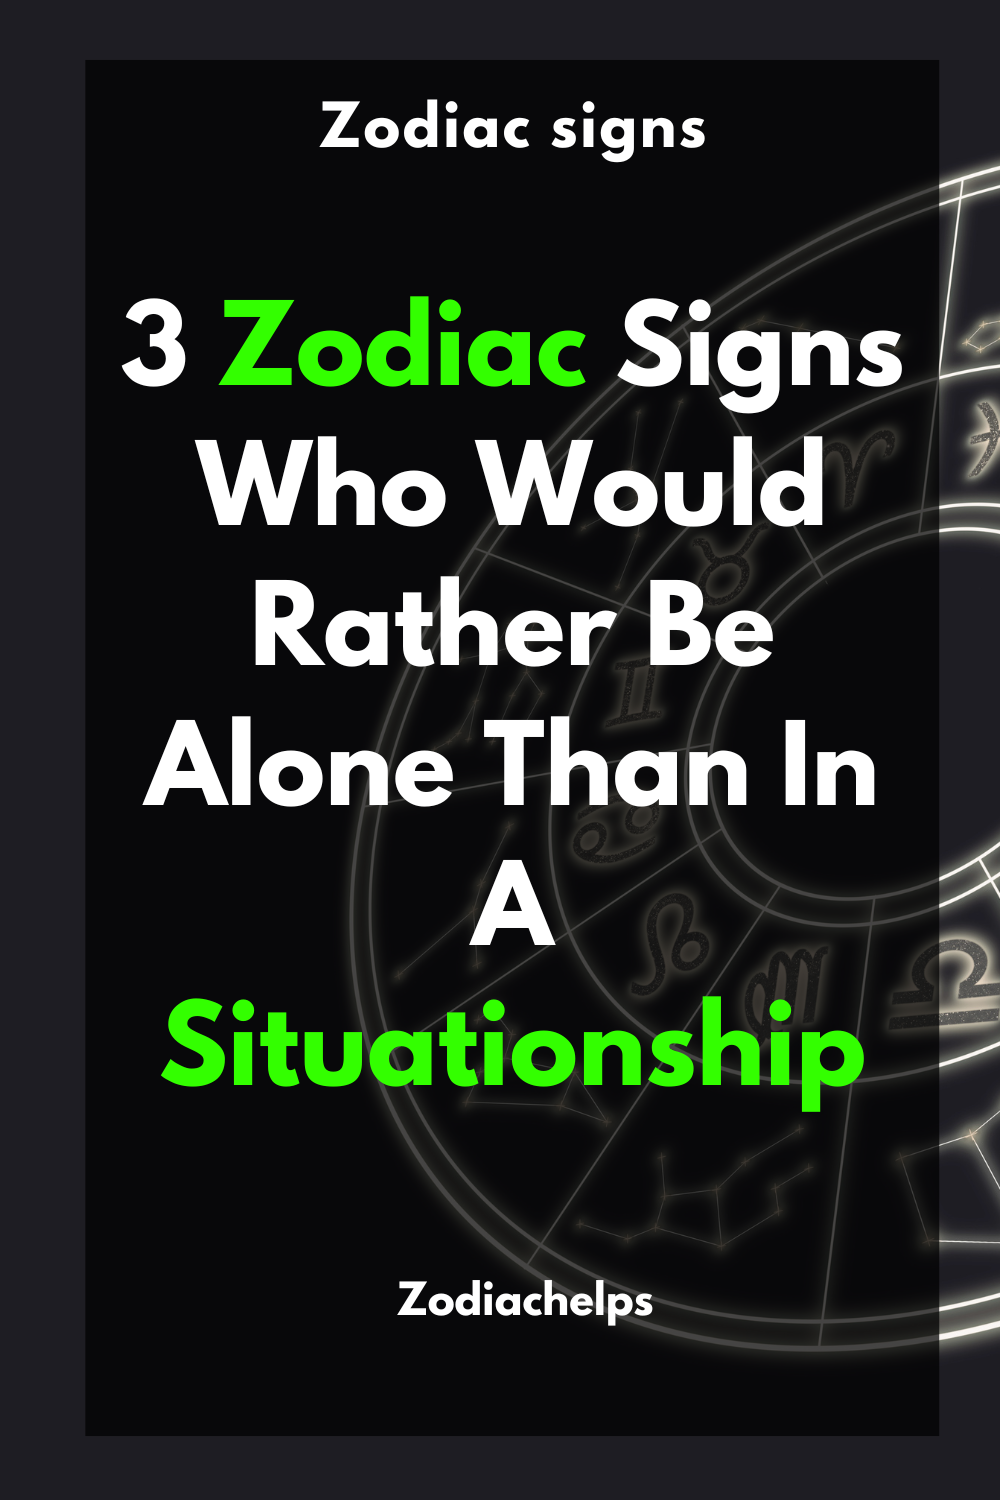 3 Zodiac Signs Who Would Rather Be Alone Than In A Situationship